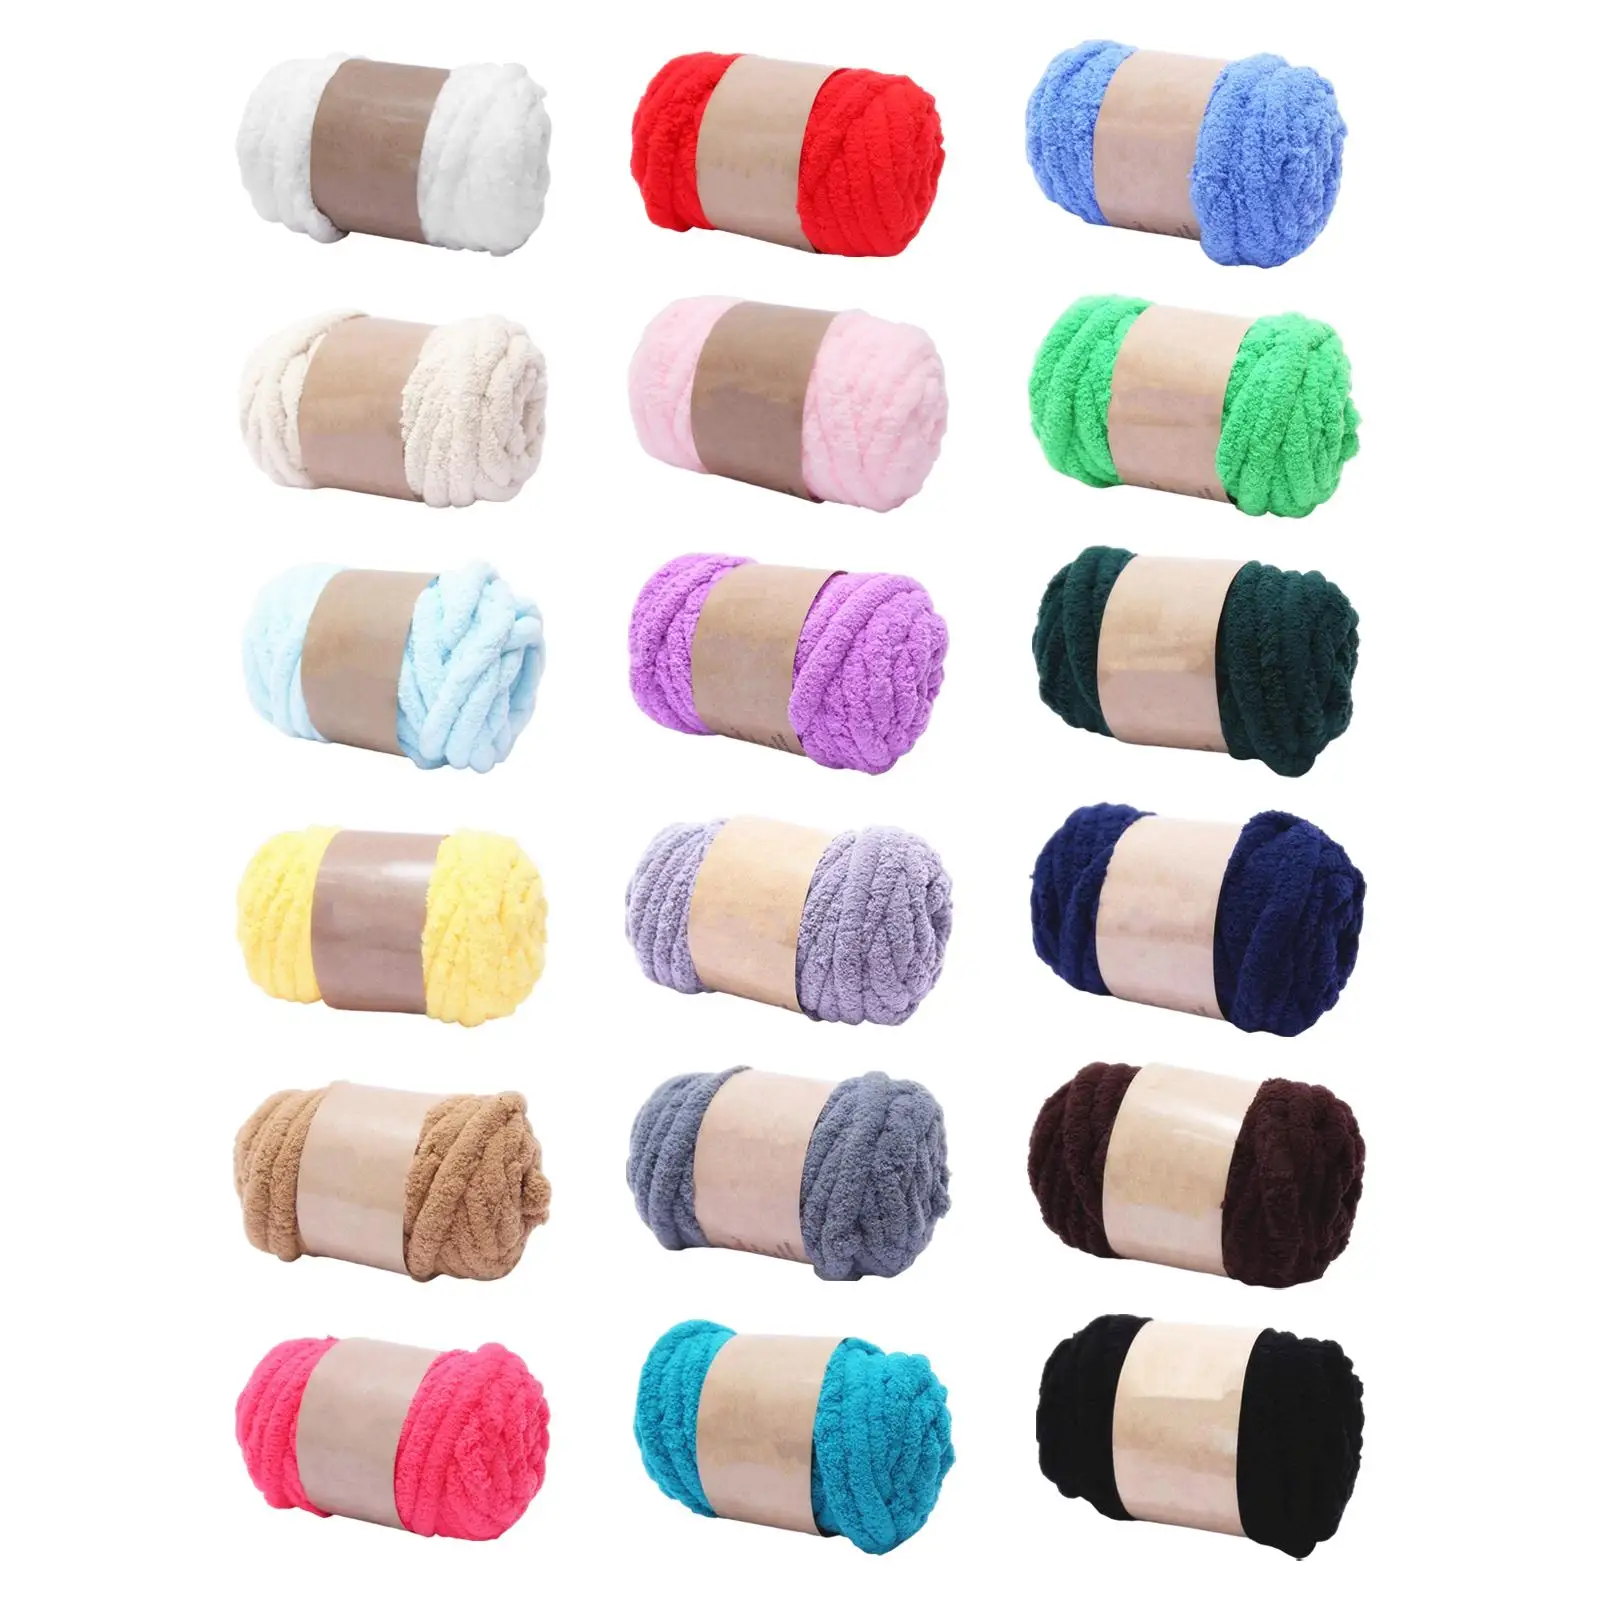 Thick Chunky Yarn Knitting Soft Weight Yarn for Knitted Blanket Weaving Hats